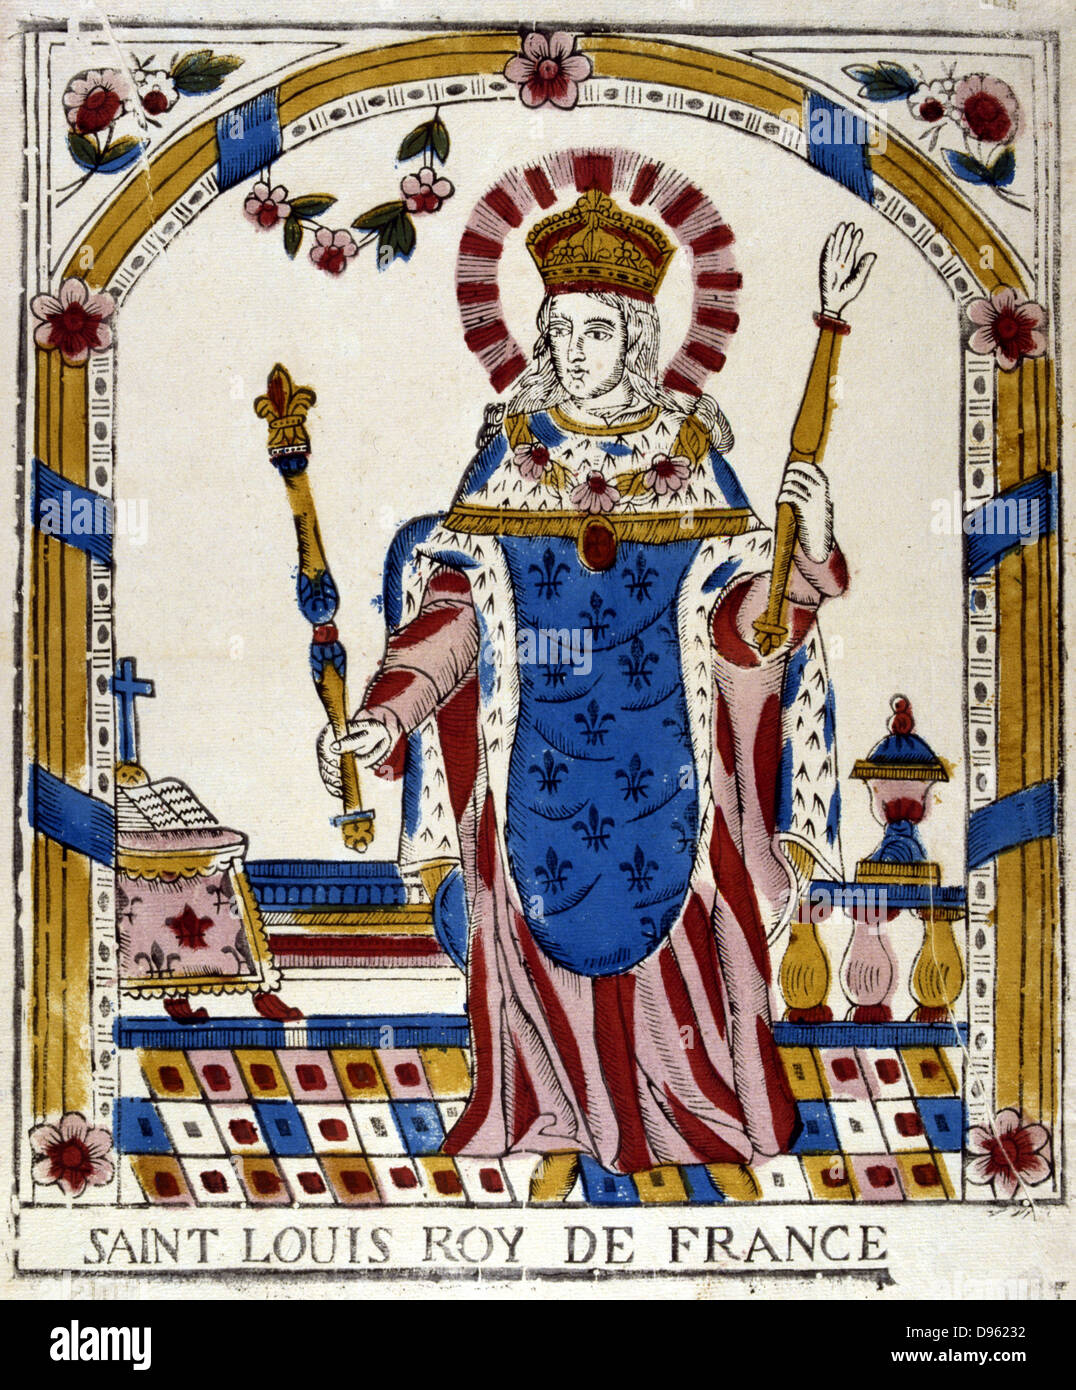 Louis, King of France, 1270